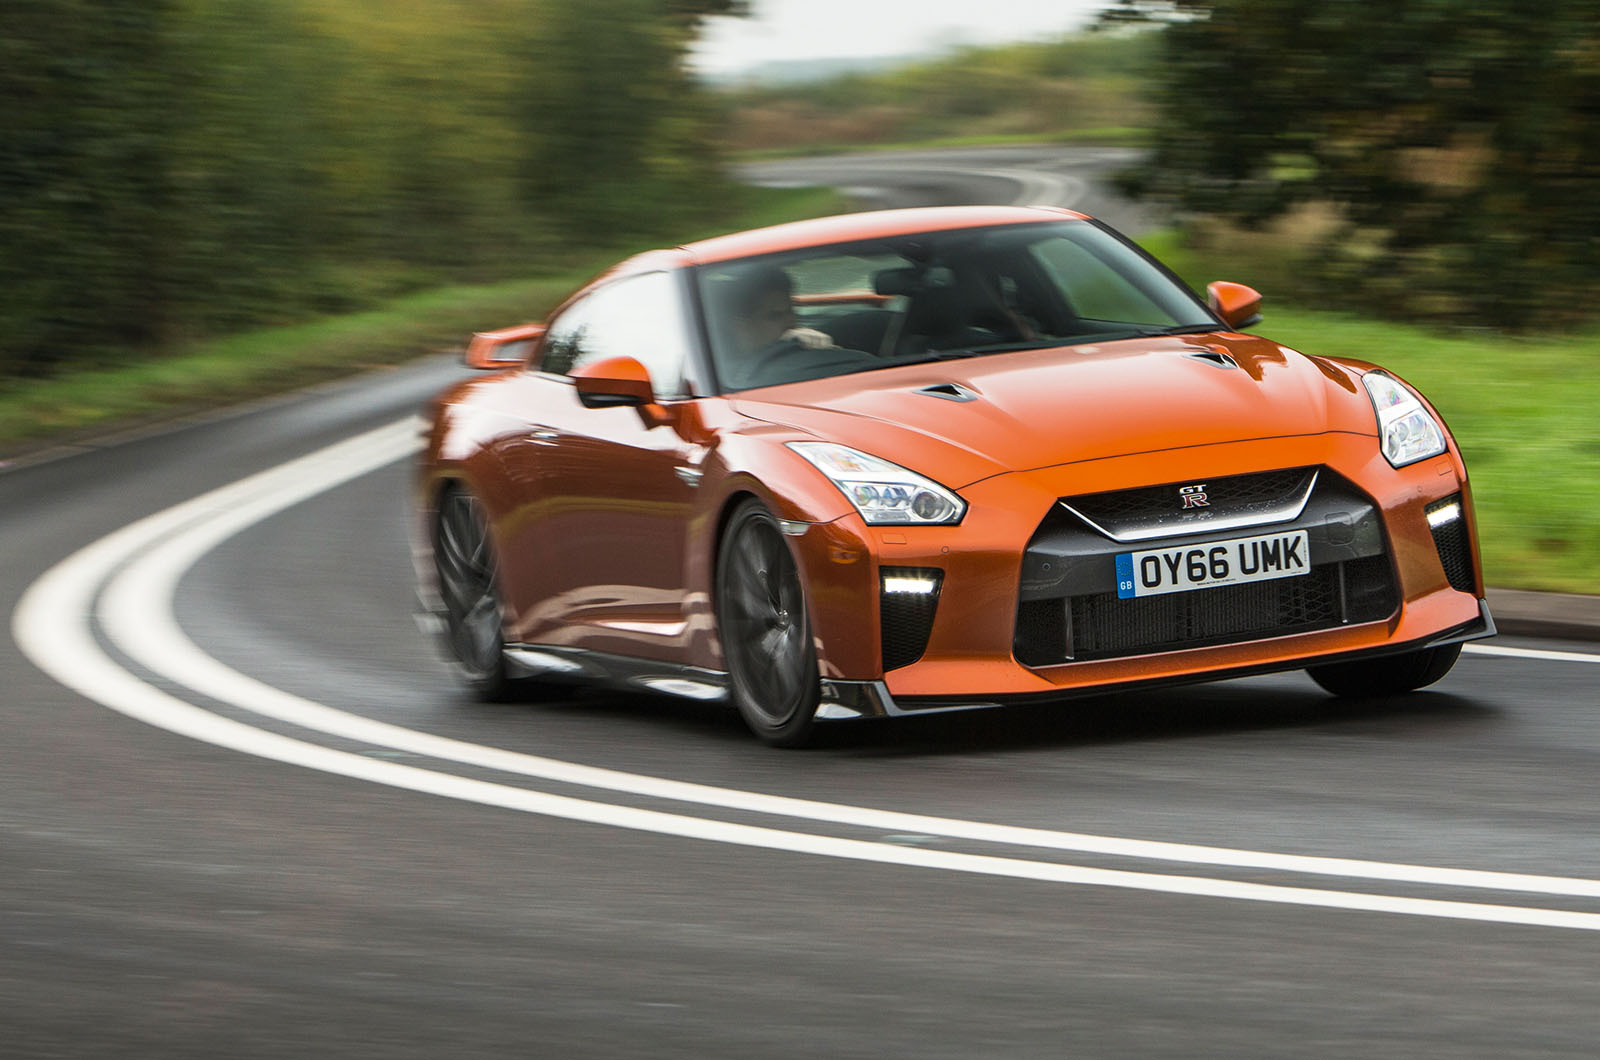 The Nissan GT-R R36 Facelift - Driving Experiences from the UKs No.1